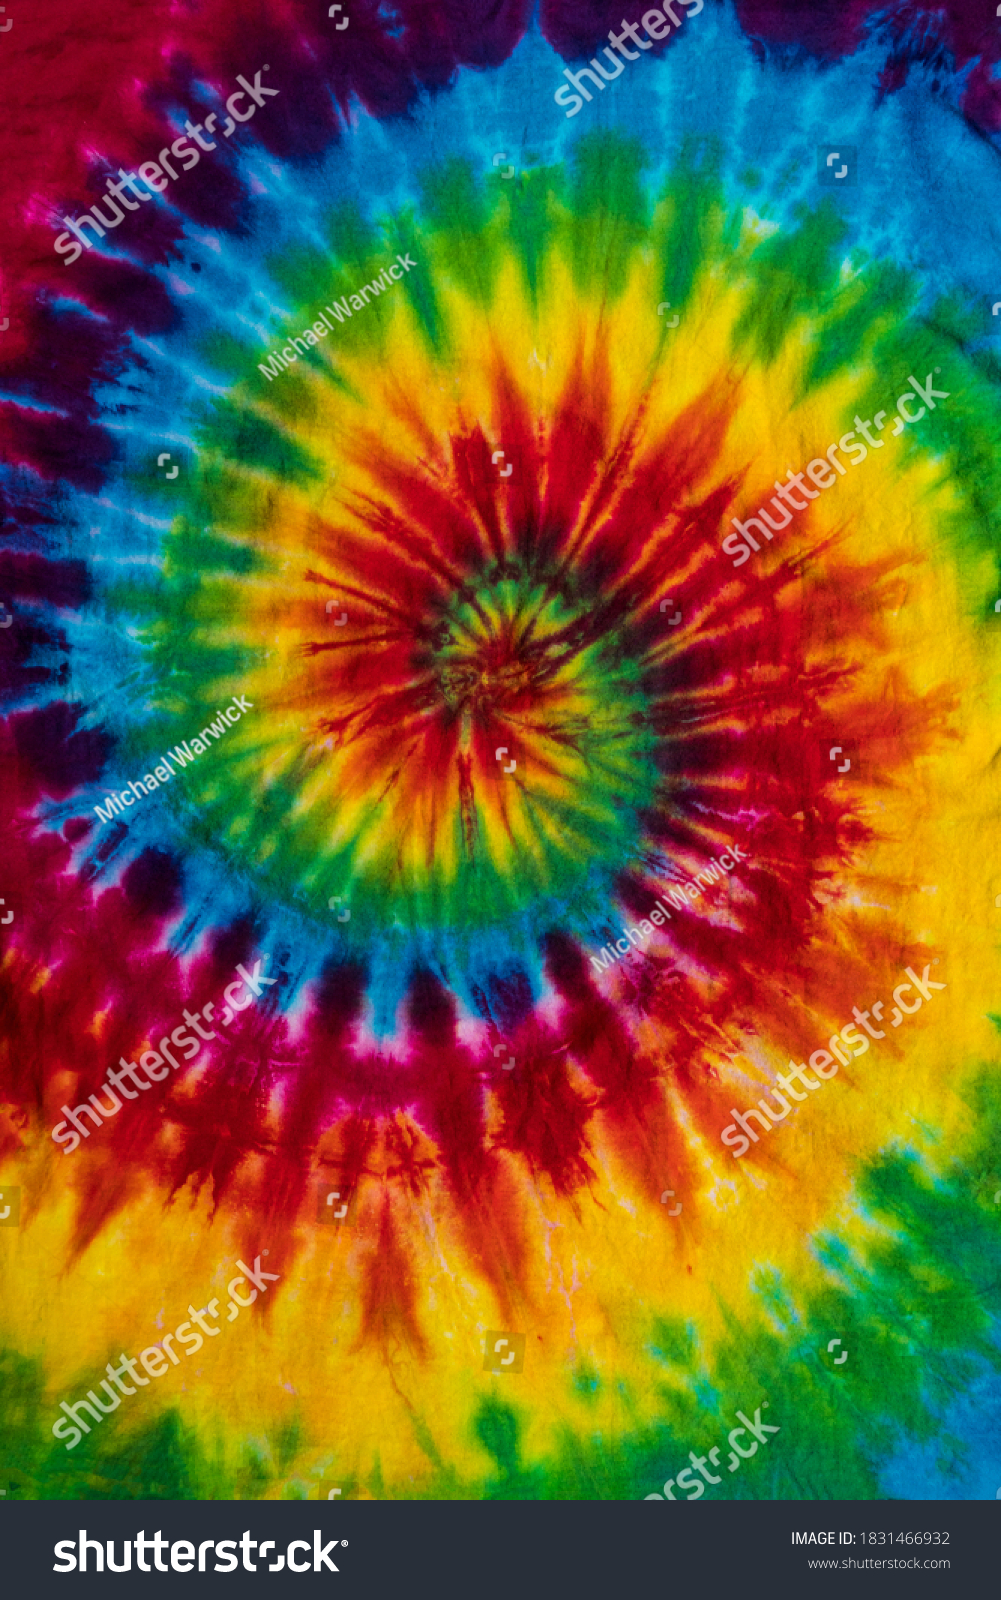 Fashionable Colorful Red, Blue, Yellow Green, Orange, Purple Retro Abstract Psychedelic Tie Dye Swirl Design #1831466932